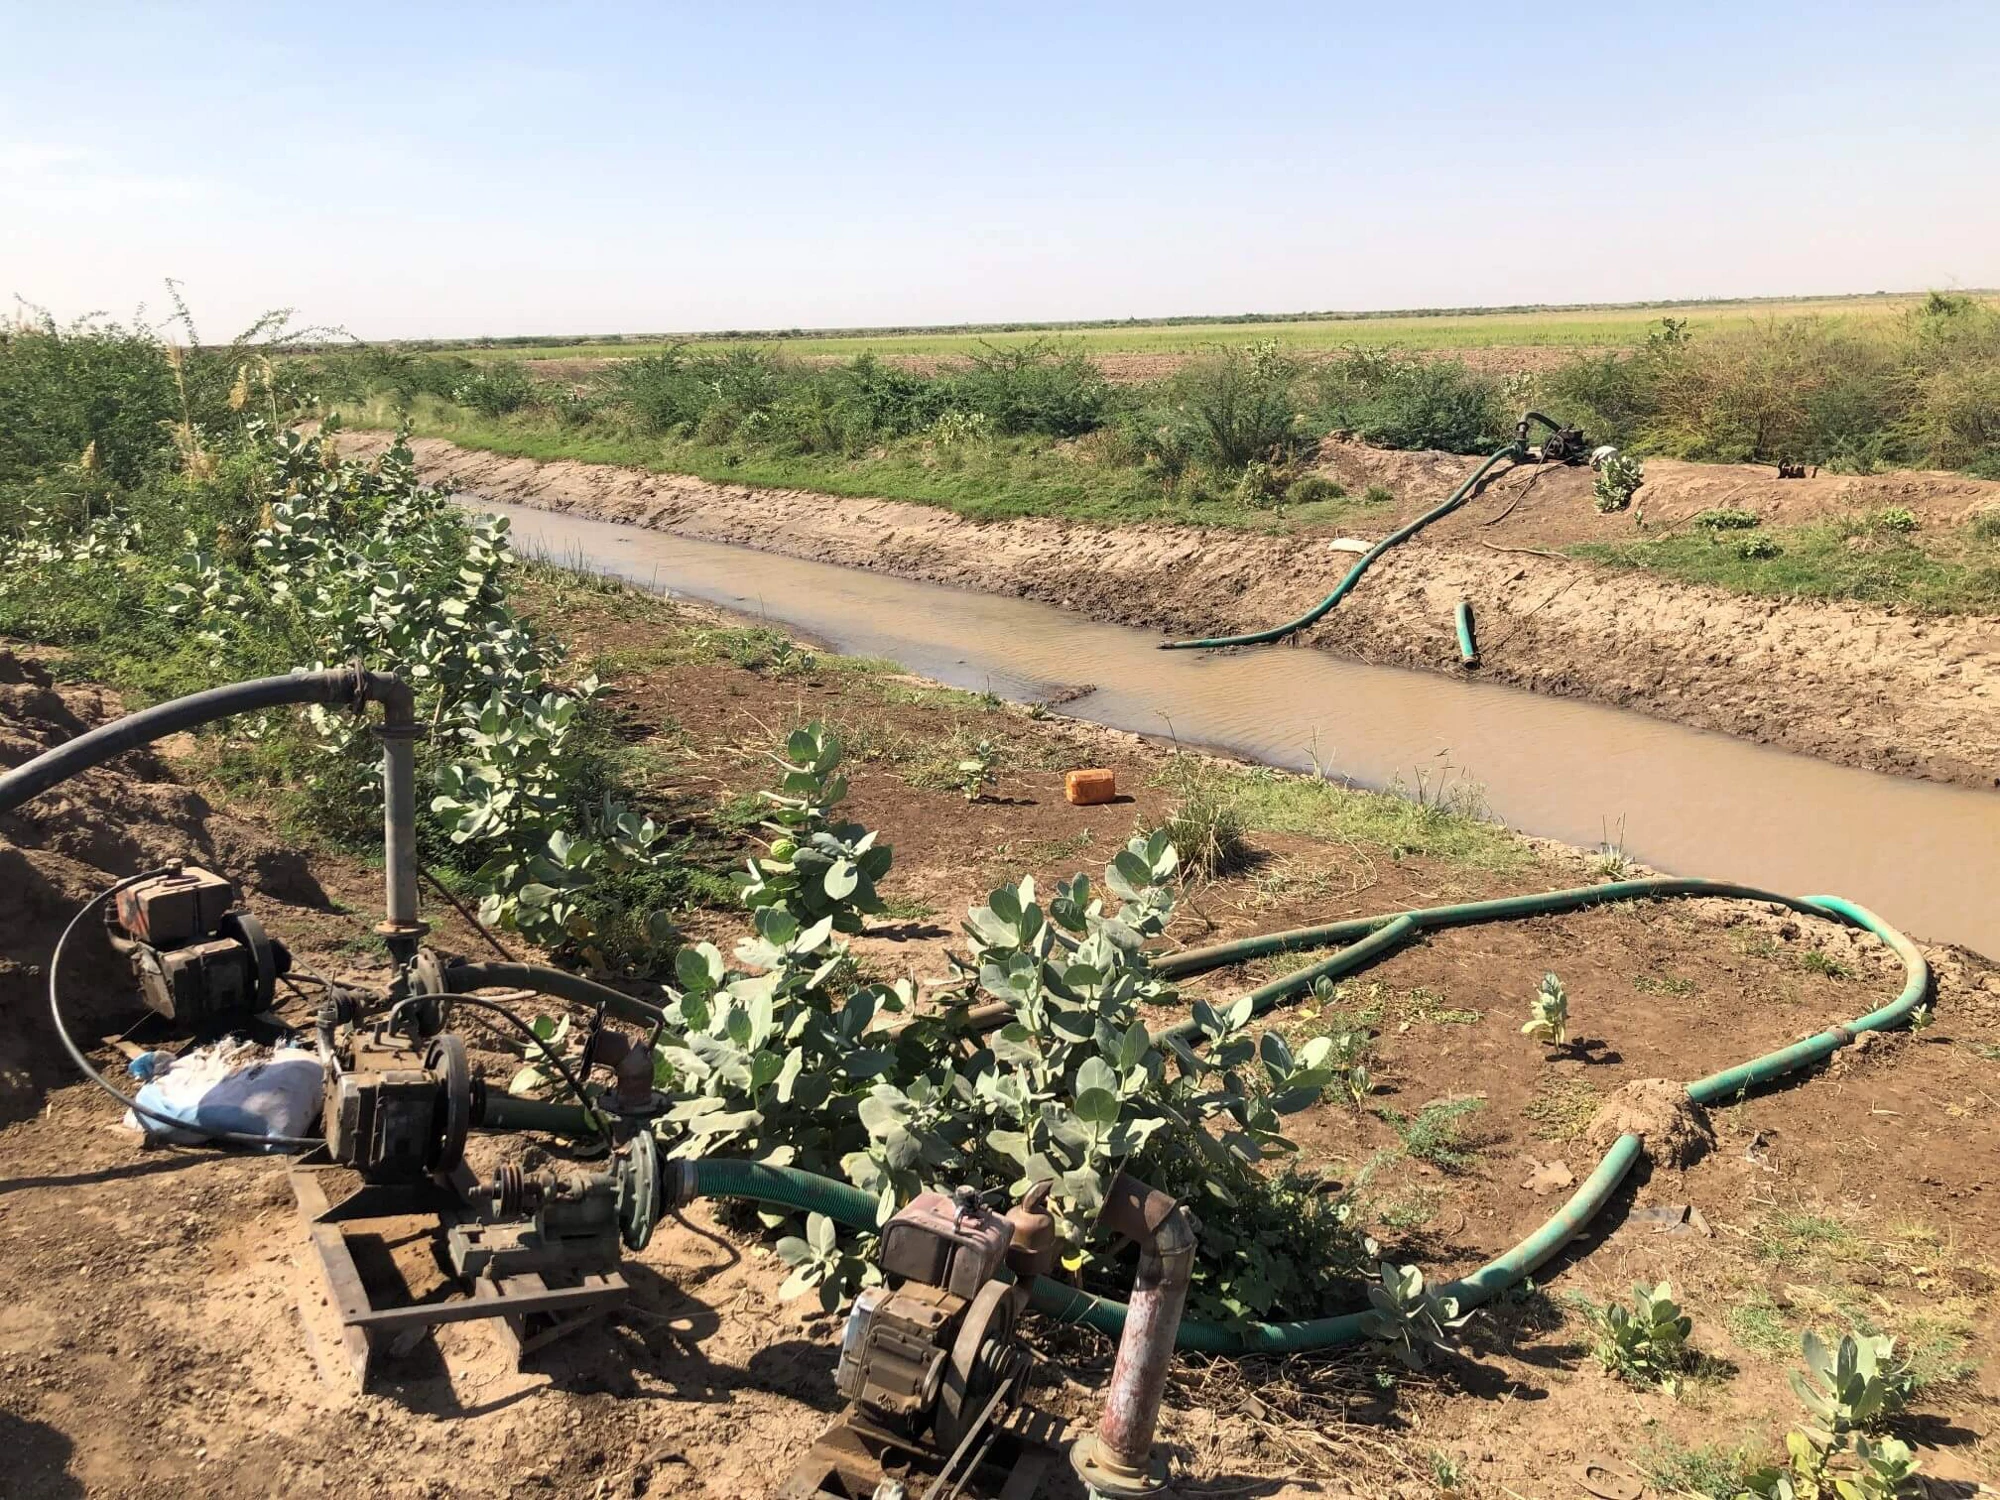 For farmers, securing water for their crops is the highest priority. These irrigation pumps do their part in supplying water for the farmers? fields. Photo credit: Yukio Tanaka